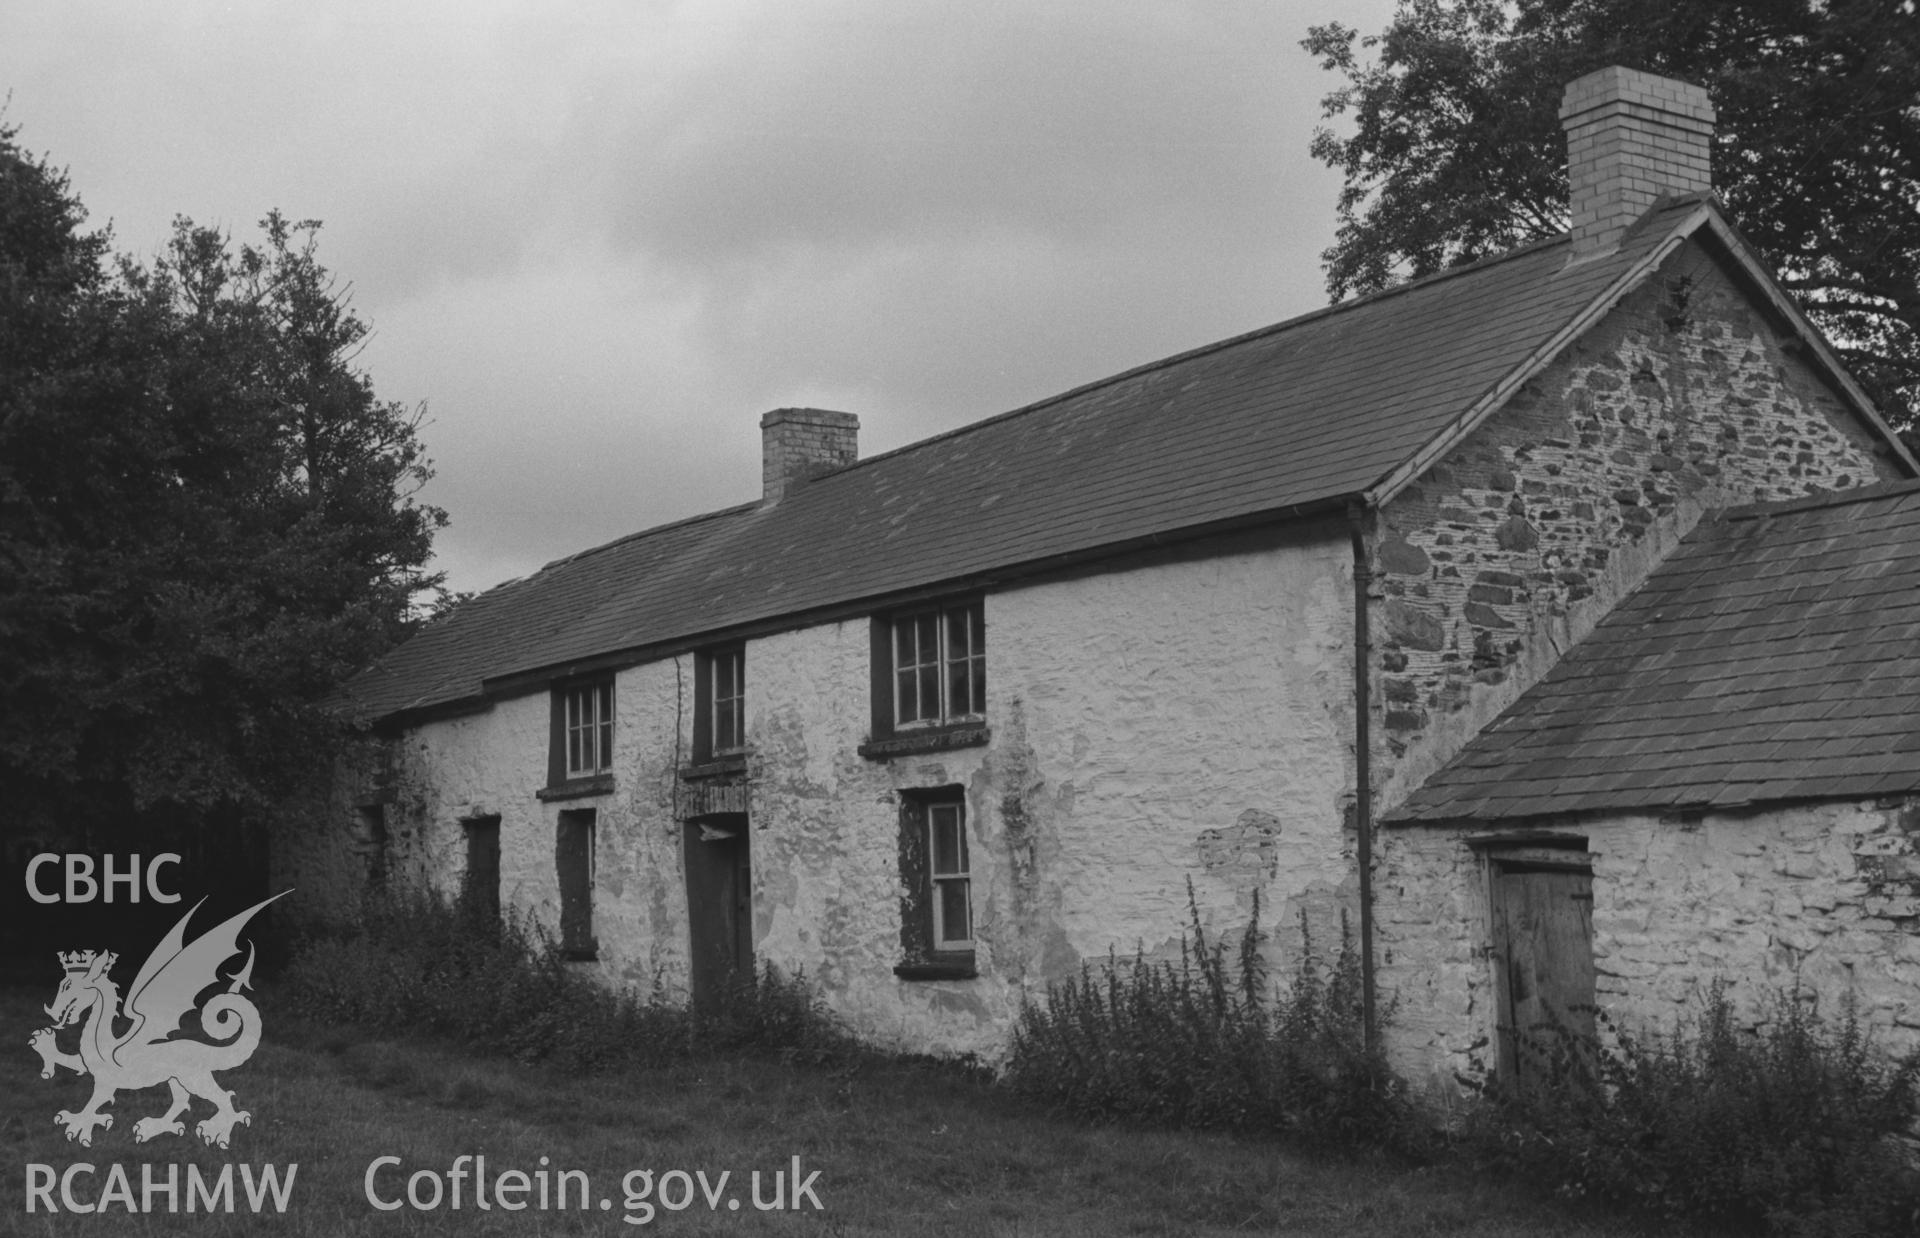 Digital copy of black & white negative showing Tan-yr-Allt Uchaf, Tregaron, now deserted. Site of Methodist meetings from 1742 when it was home of Thomas Jones. Photographed by Arthur O. Chater, 2nd September 1966, looking east from Grid Ref SN 698 604.